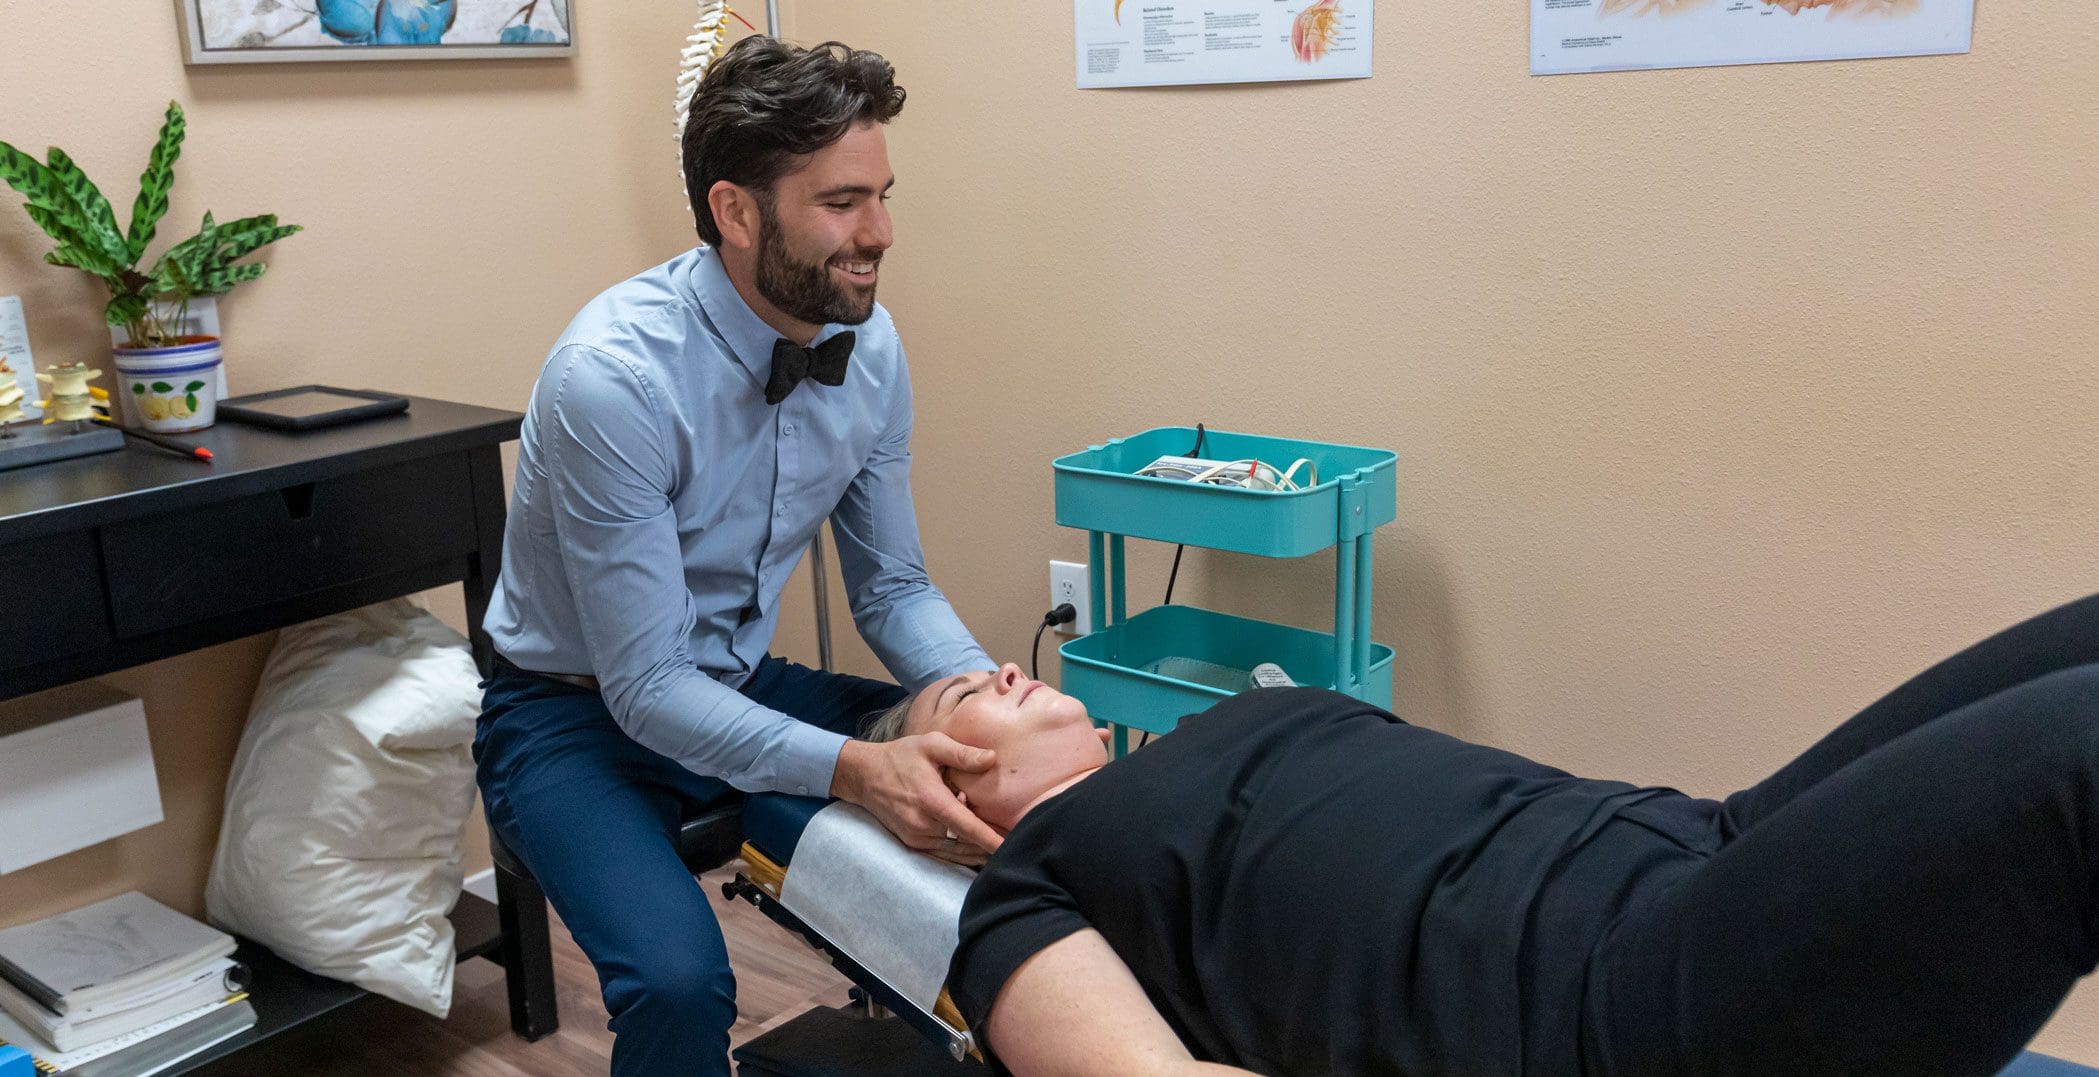 Tigard Chiropractor administers a neck adjustment to treat whiplash pain.